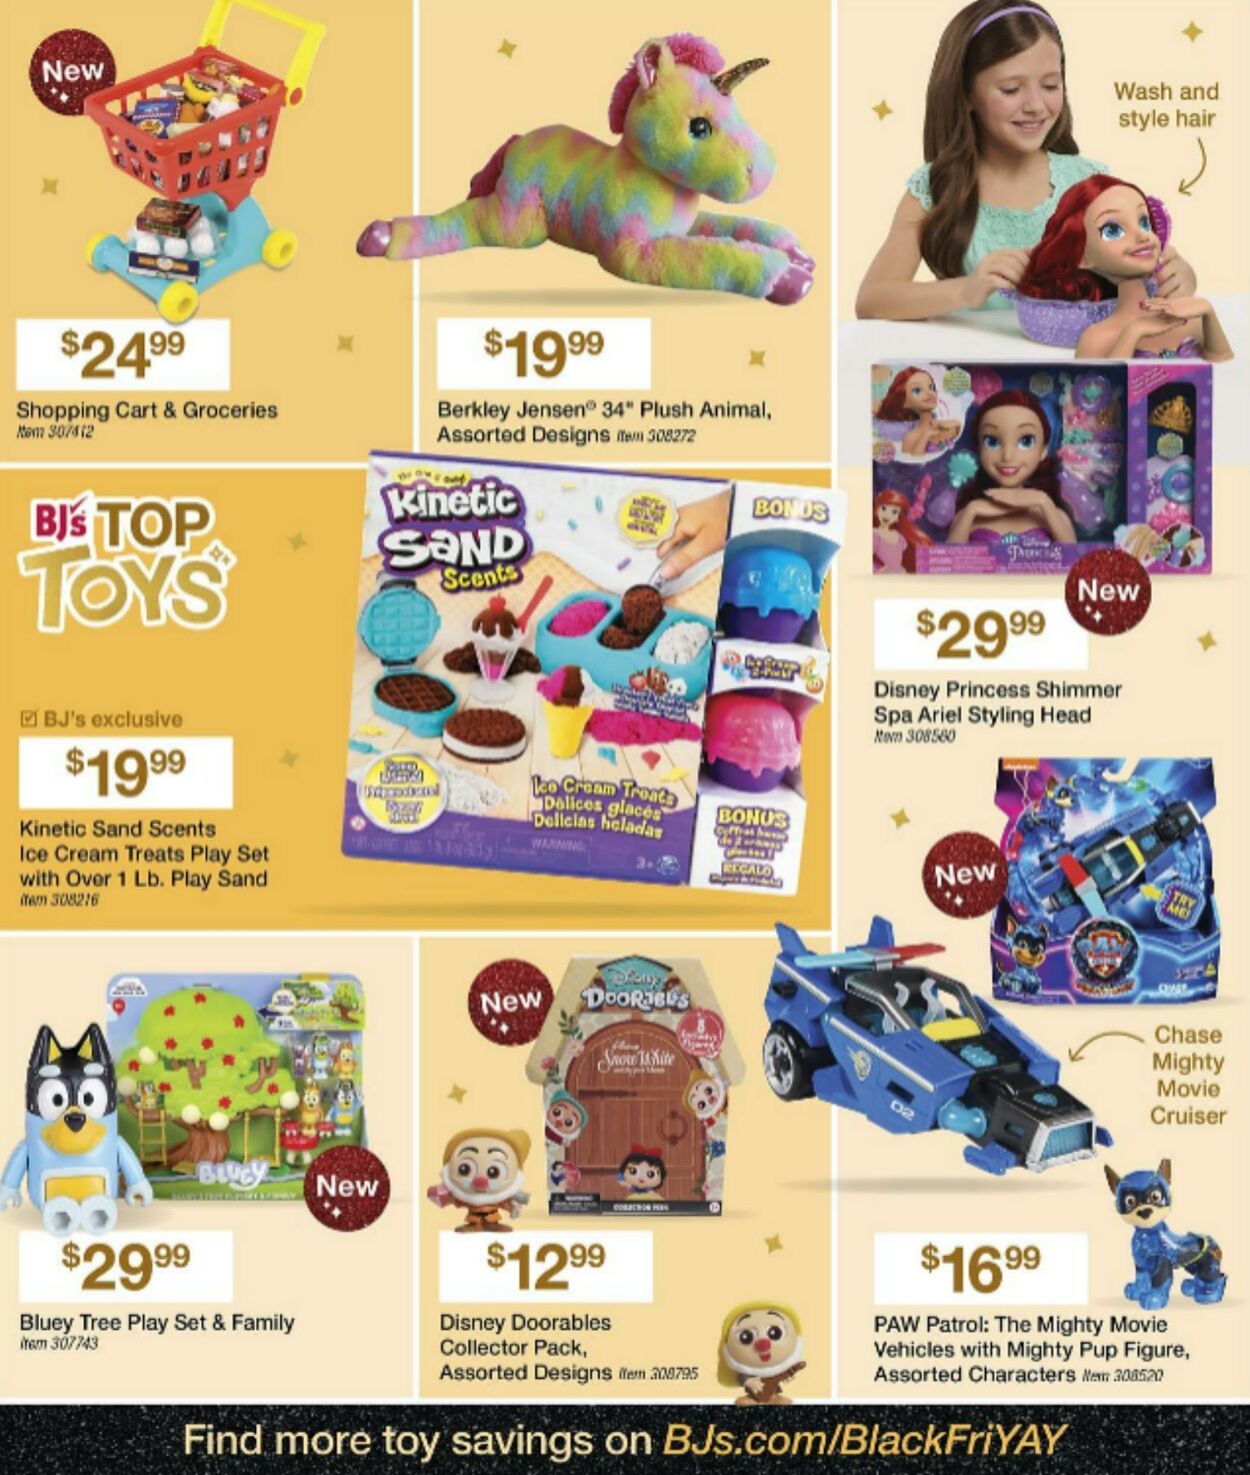 Weekly ad BJ's 10/26/2023 - 11/16/2023